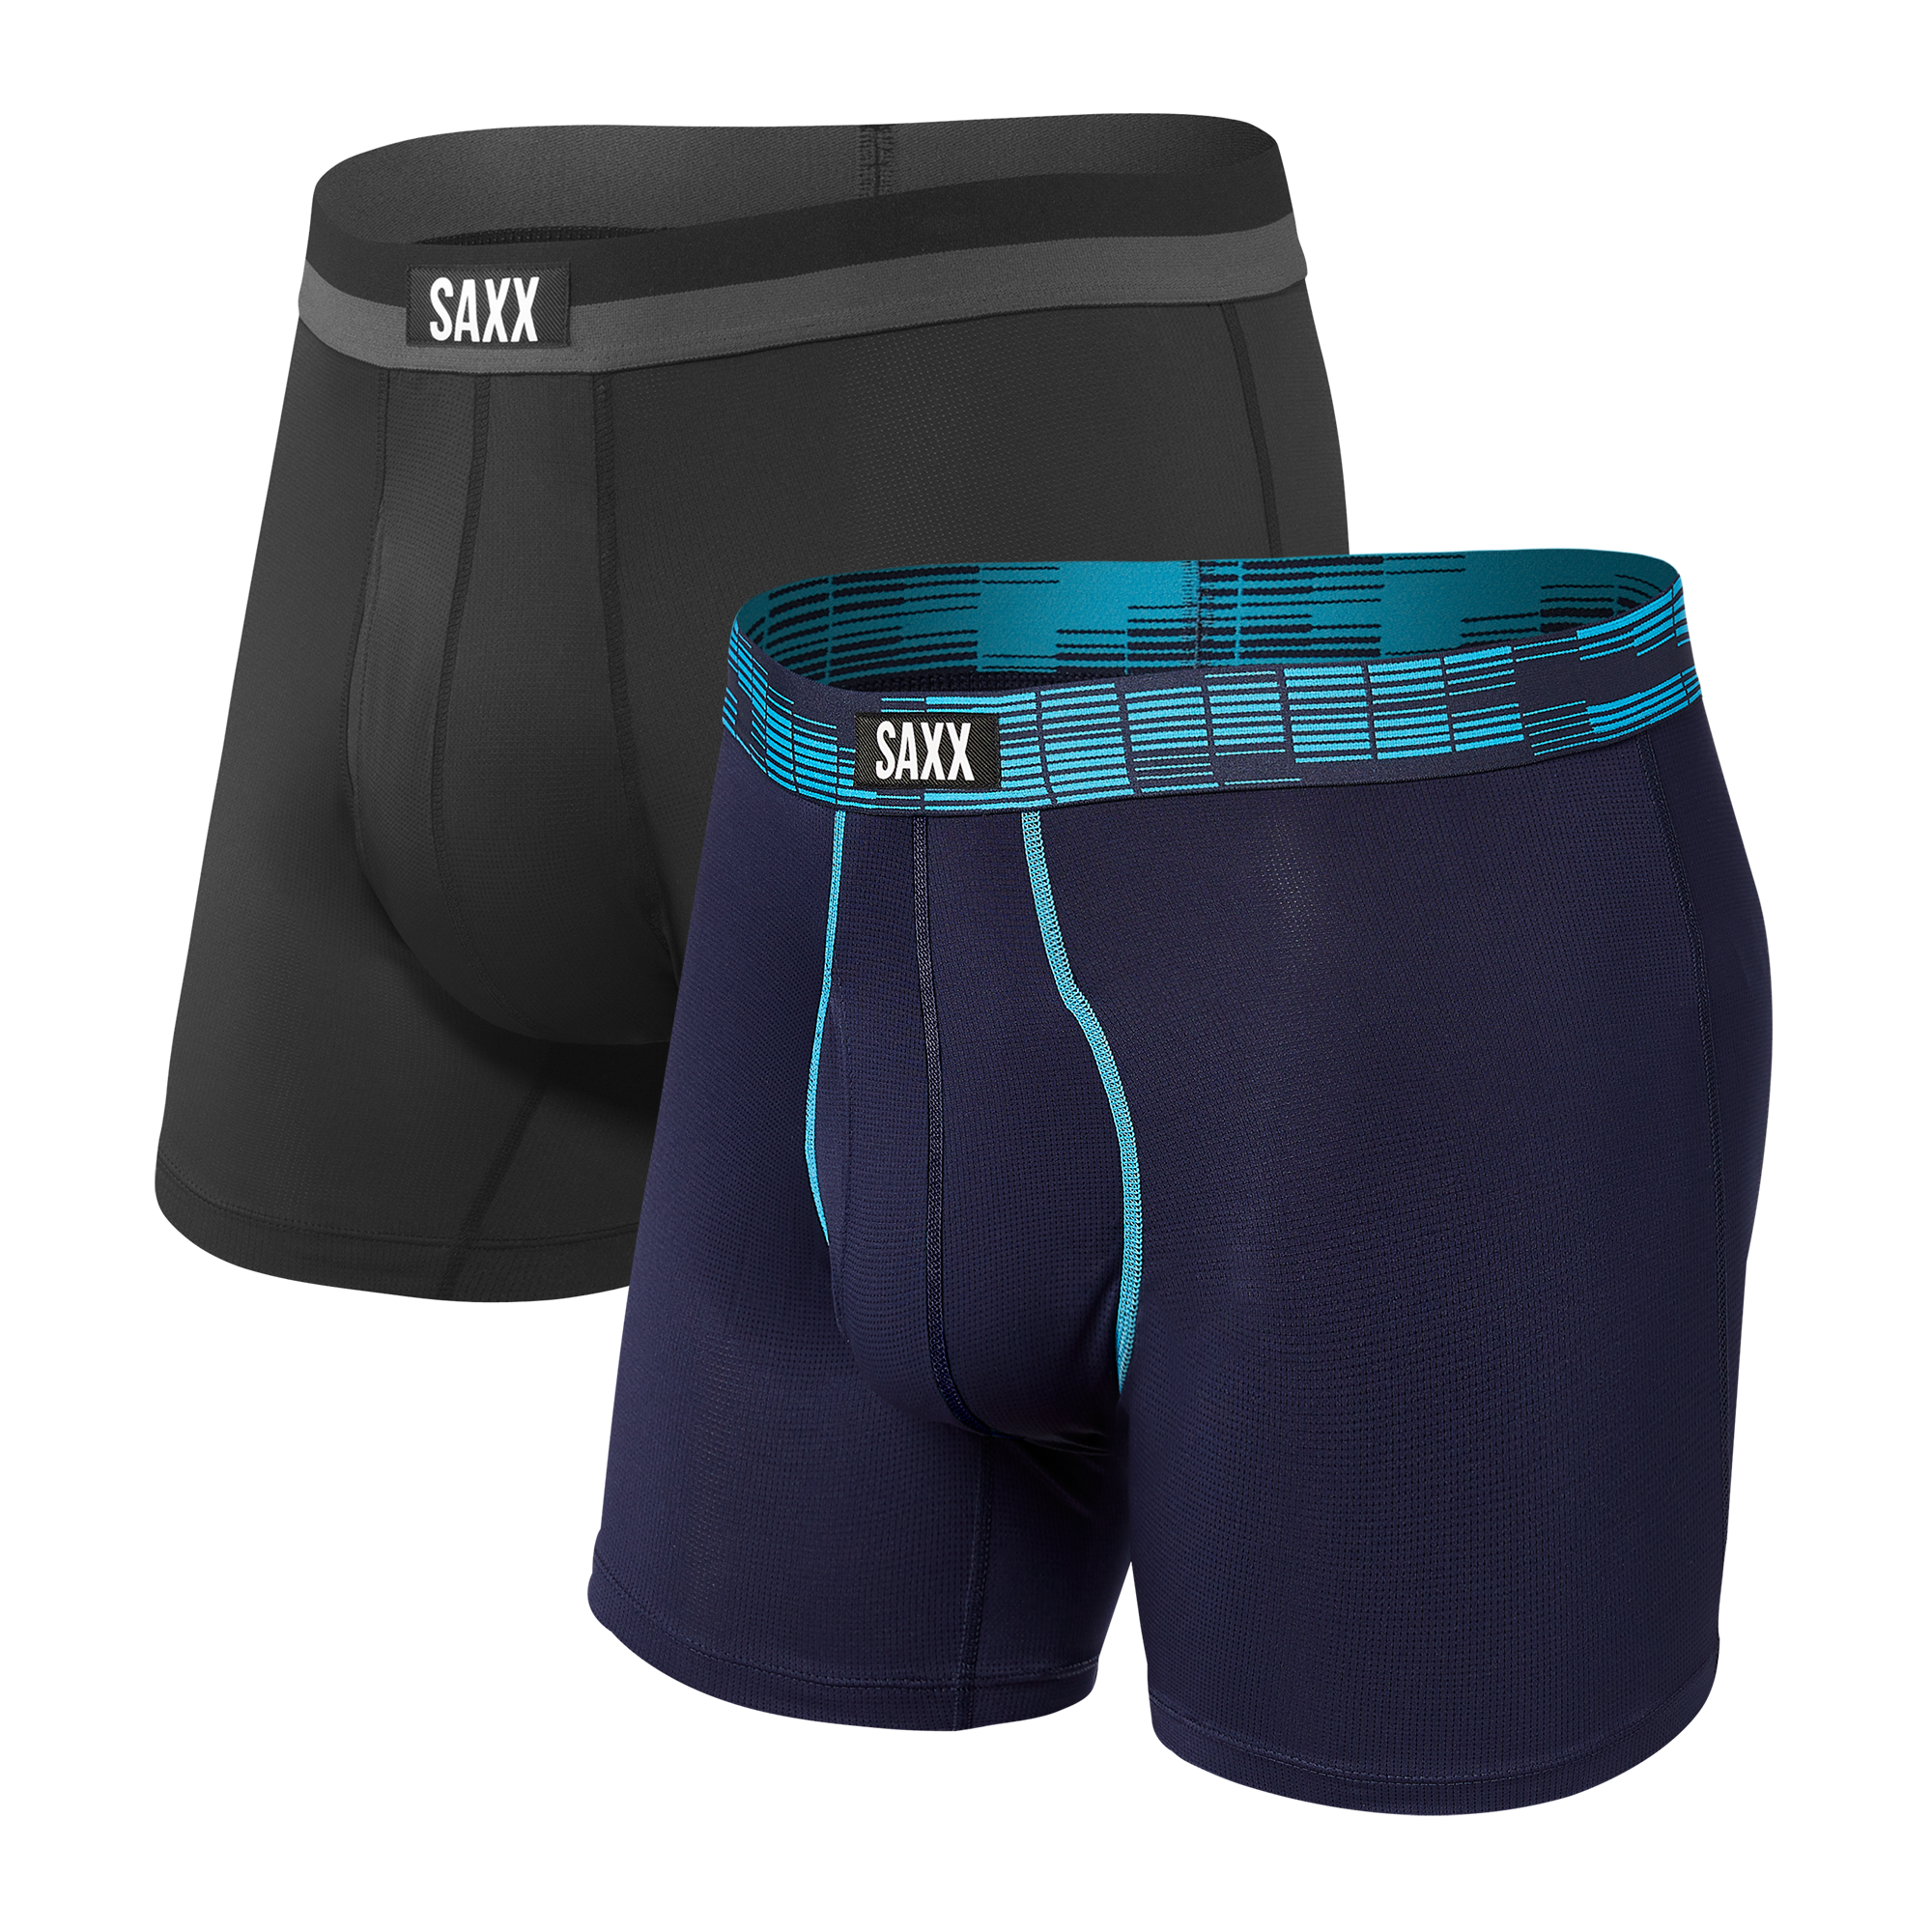 Buy VIP Men's Cotton Boxer Shorts with Side Pockets (Pack of 2) - Assorted  Pack (Striker_CR_PKT_M) at